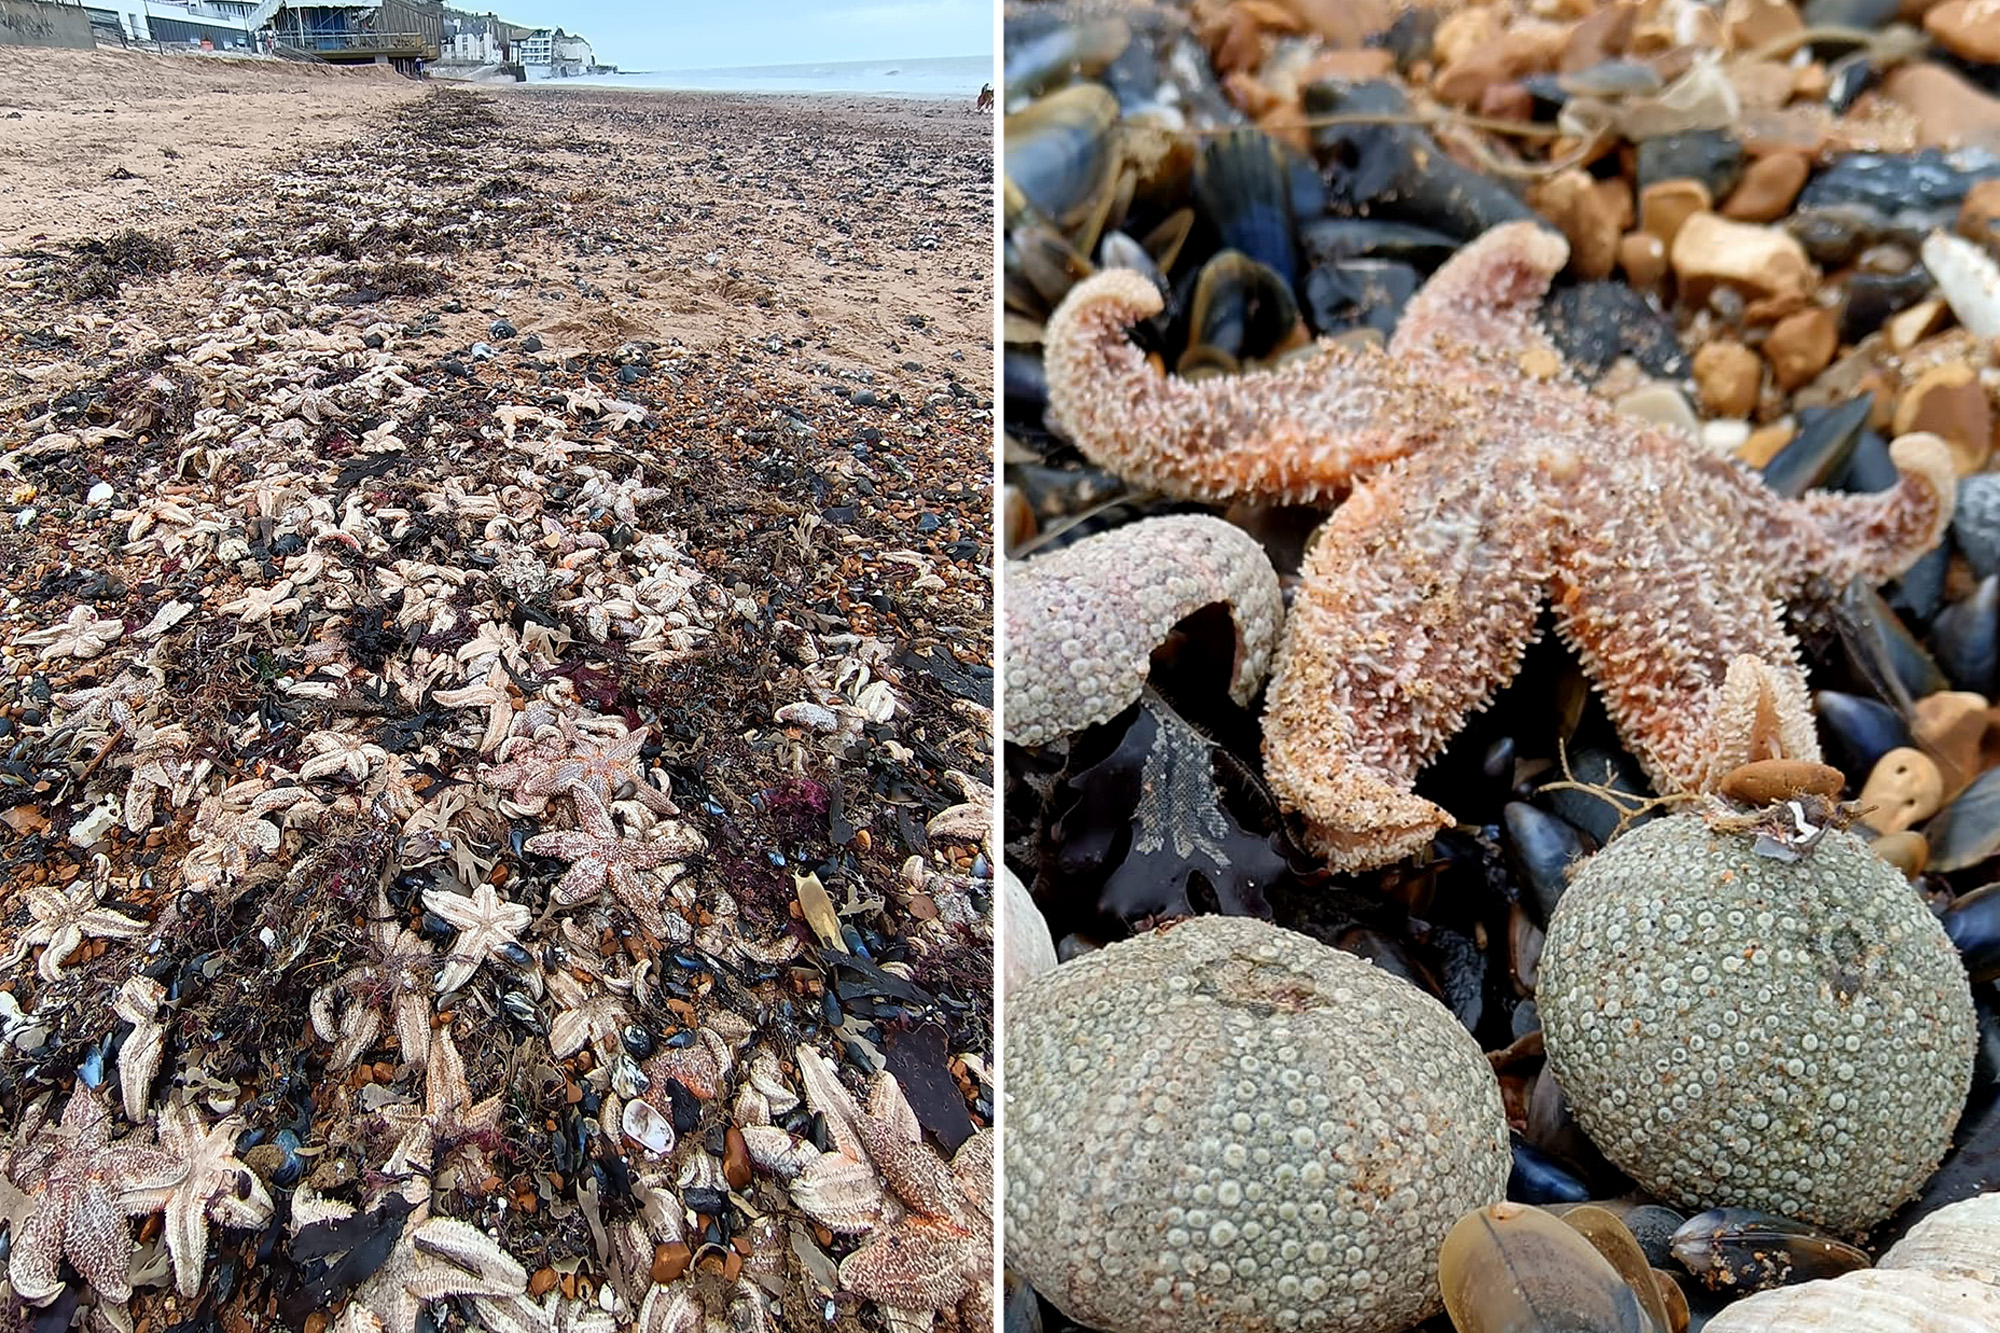 Thousands of dead starfish have washed up on a beach in Kent, England at Margate Winter Gardens and the lido at Margate Beach